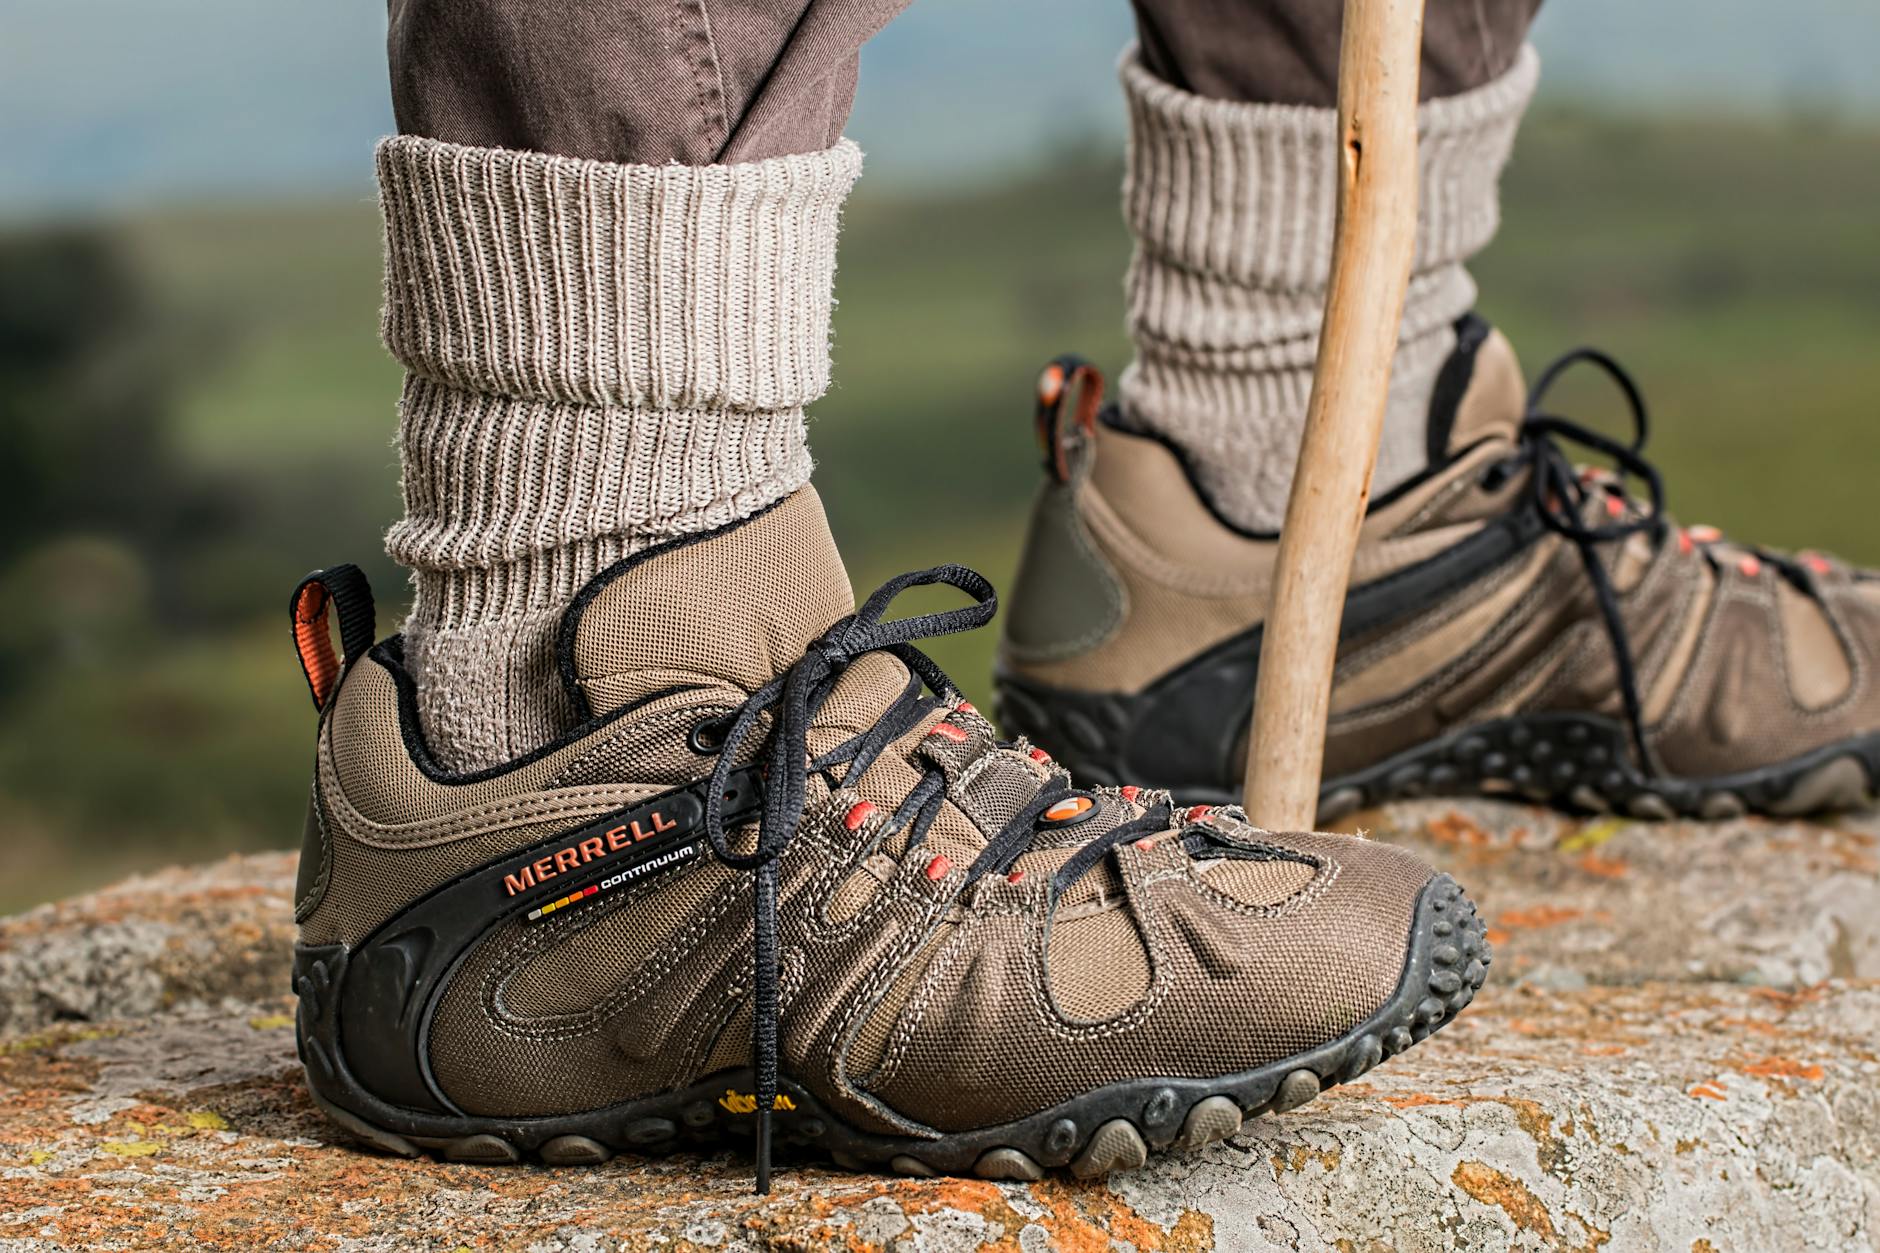 one of the best hiking shoes brands